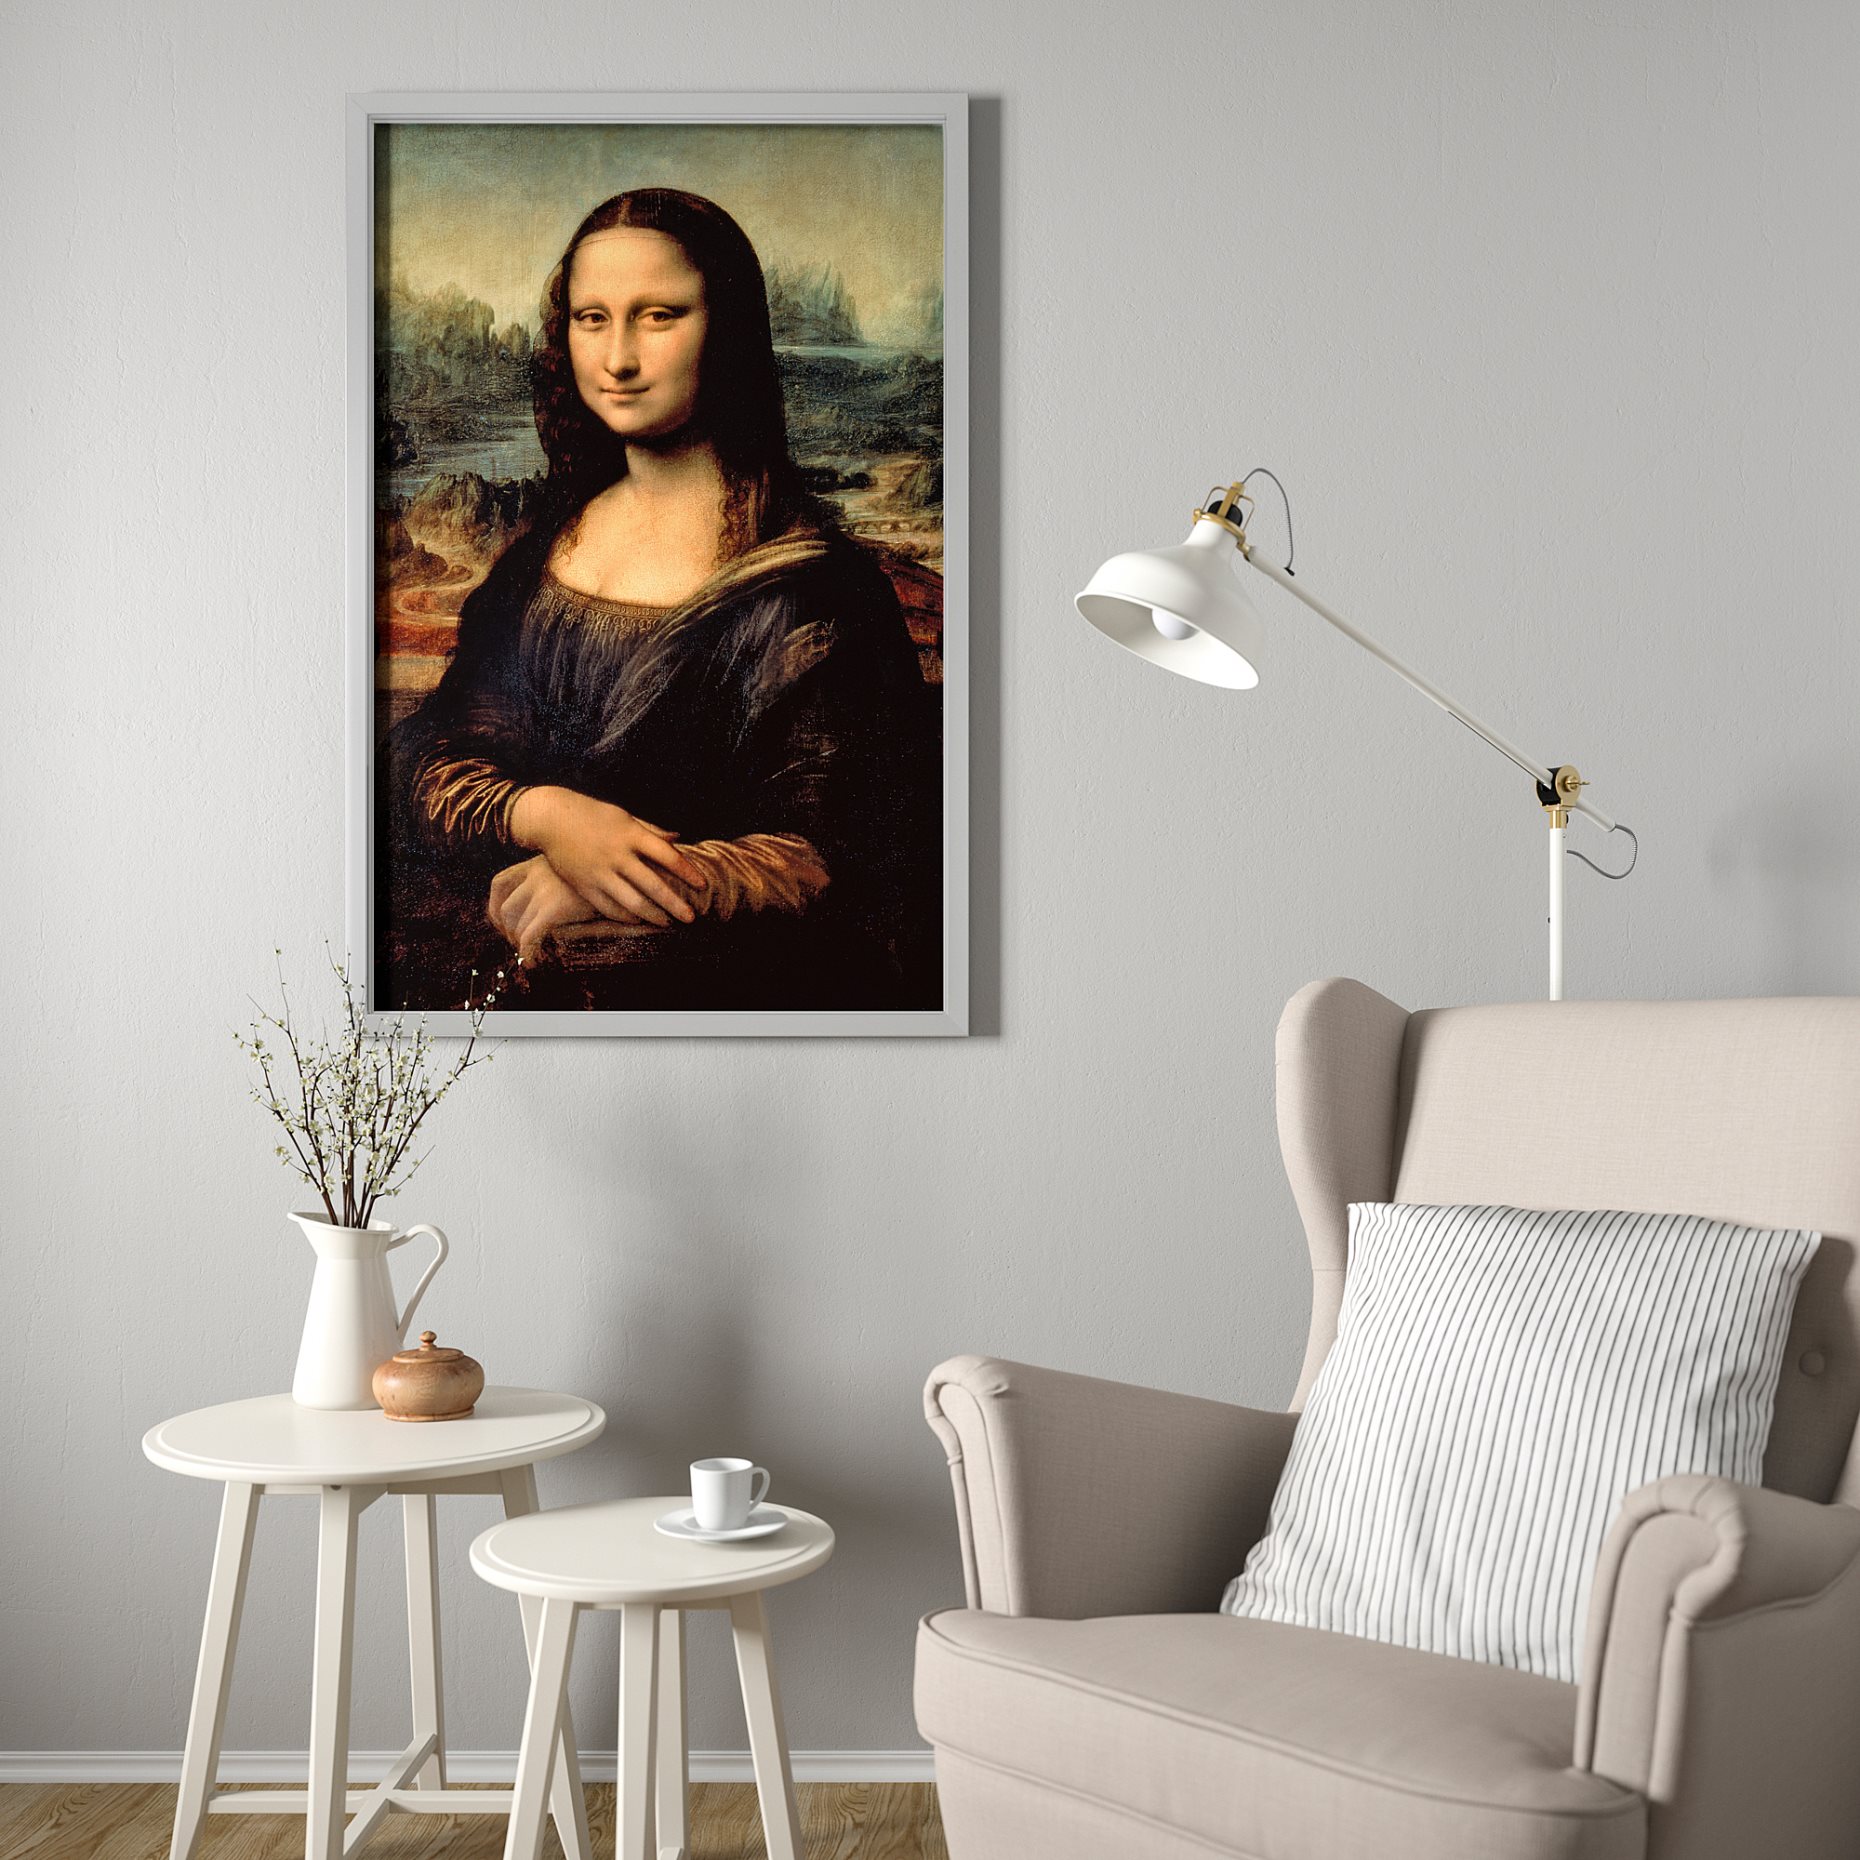 BJÖRKSTA, picture with frame/Mona Lisa, 78x118 cm, 693.847.41